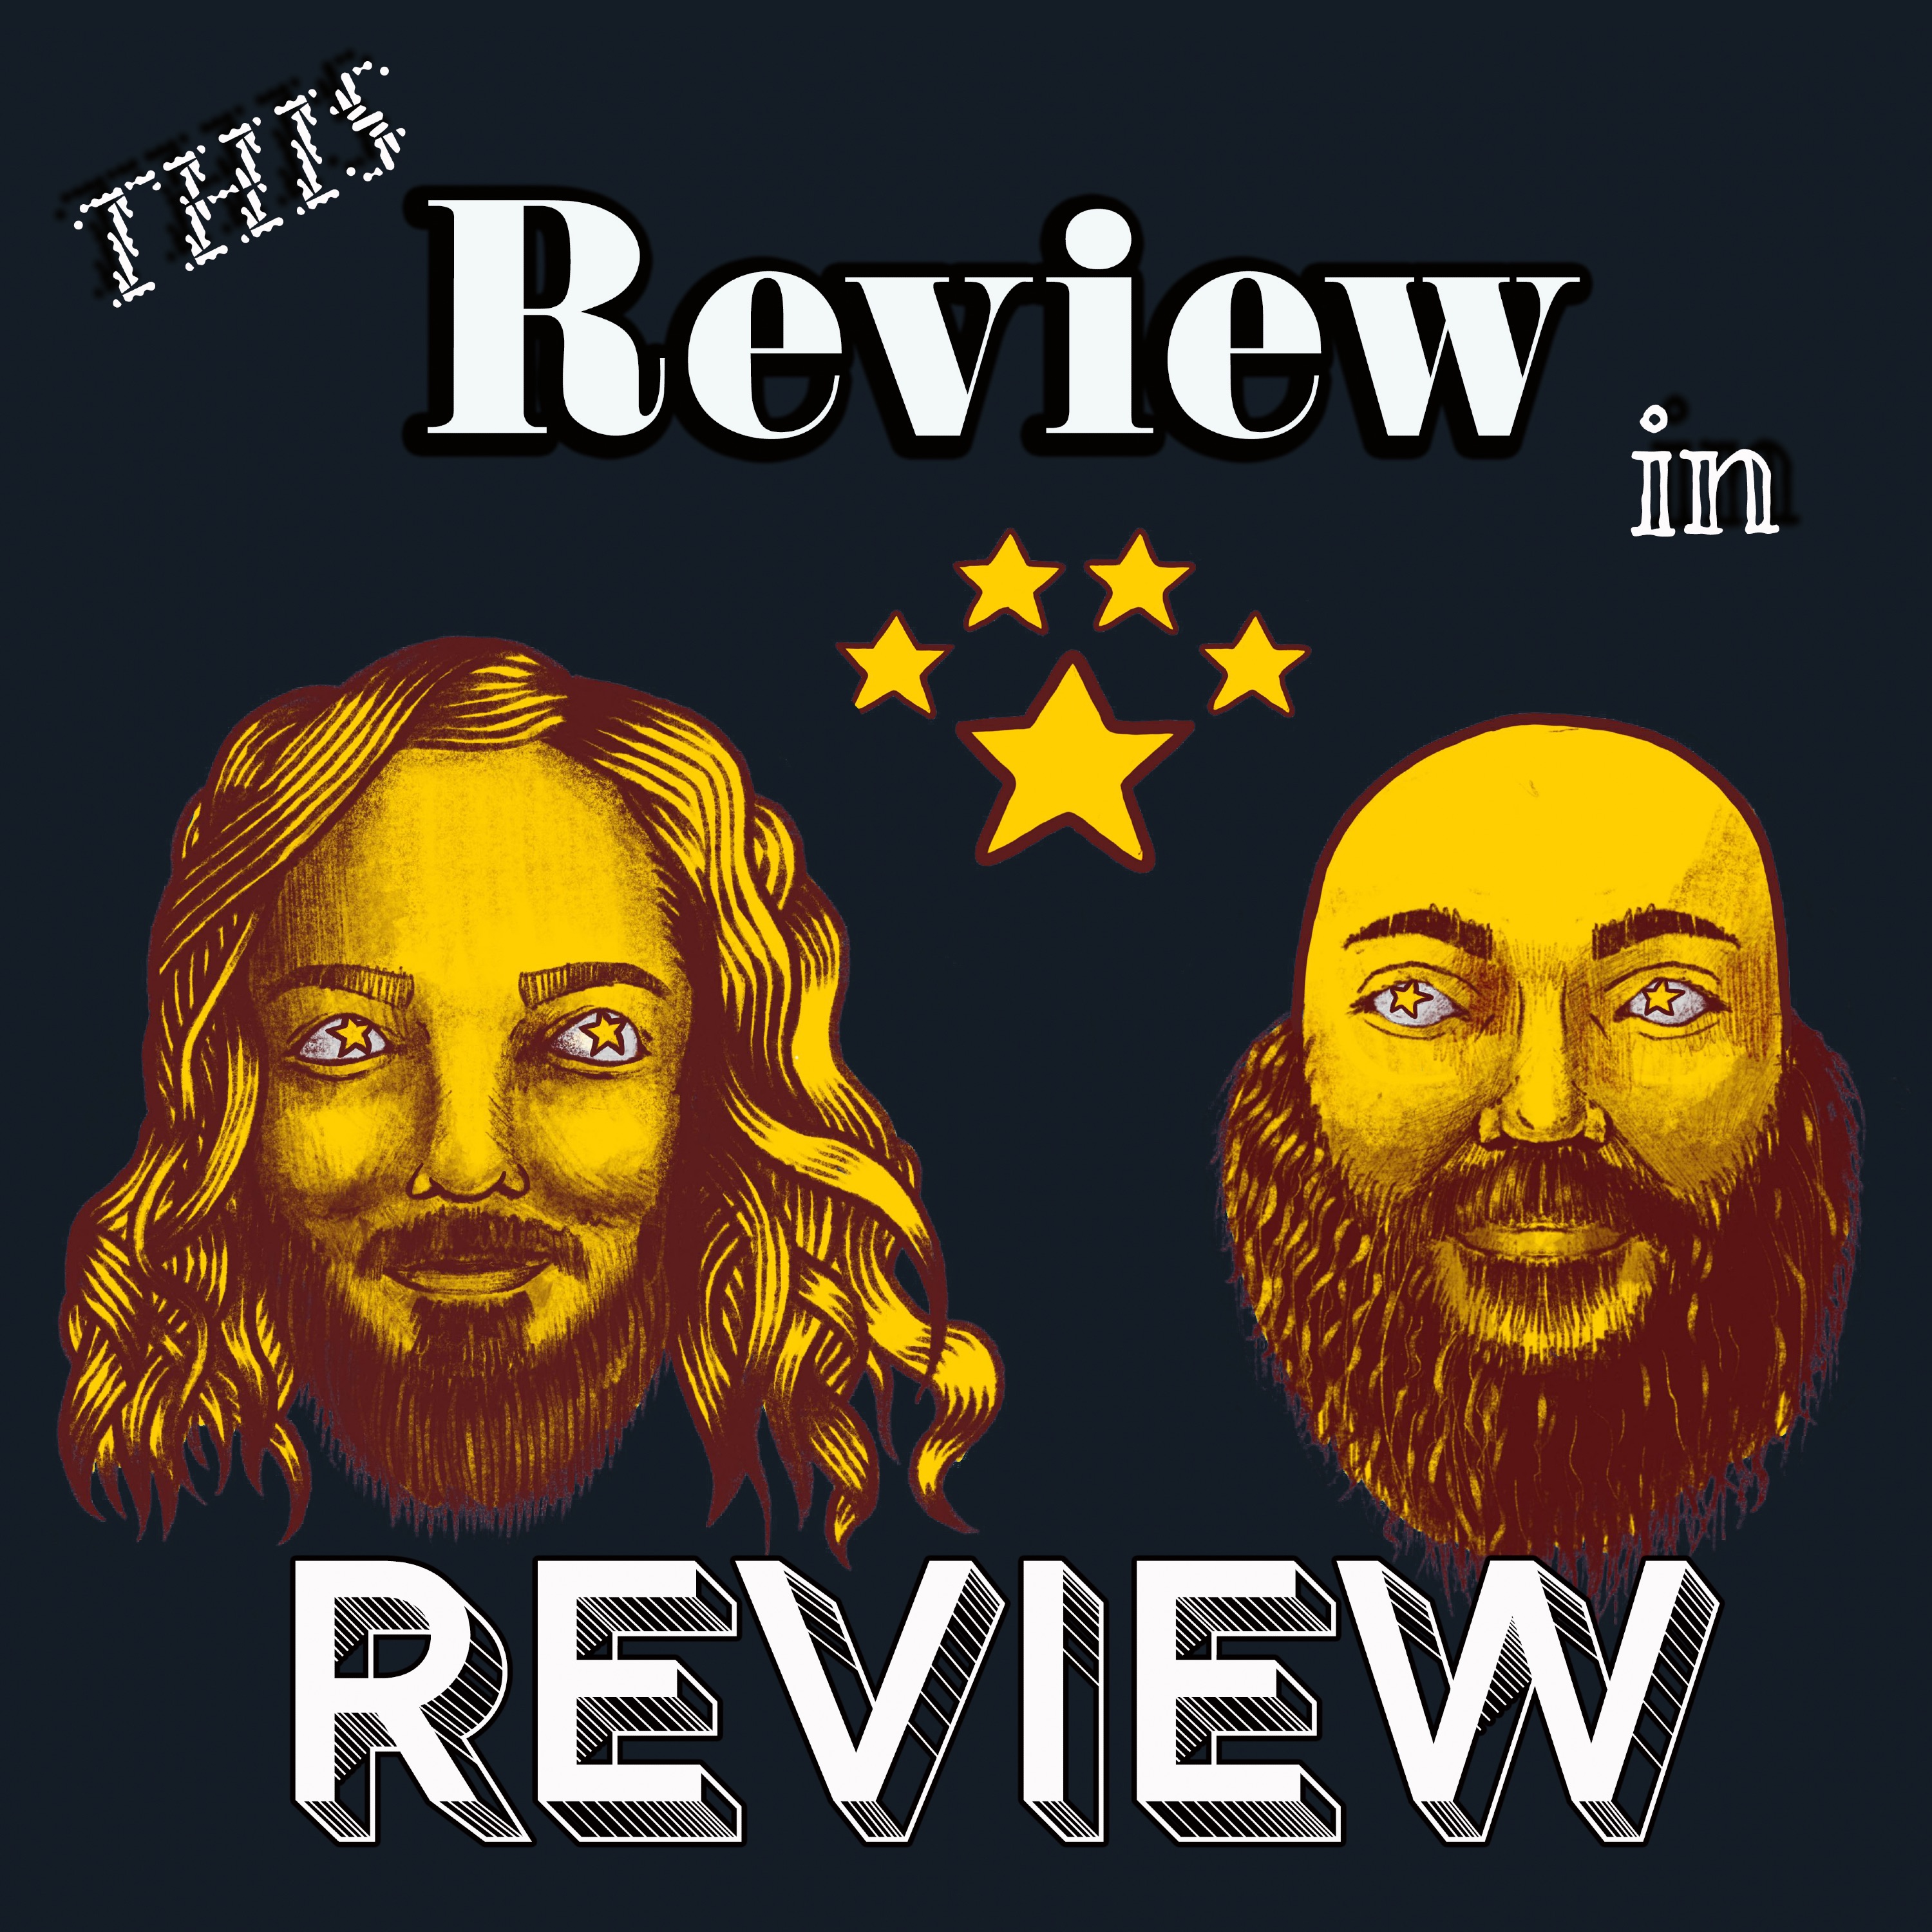 This Review in Review